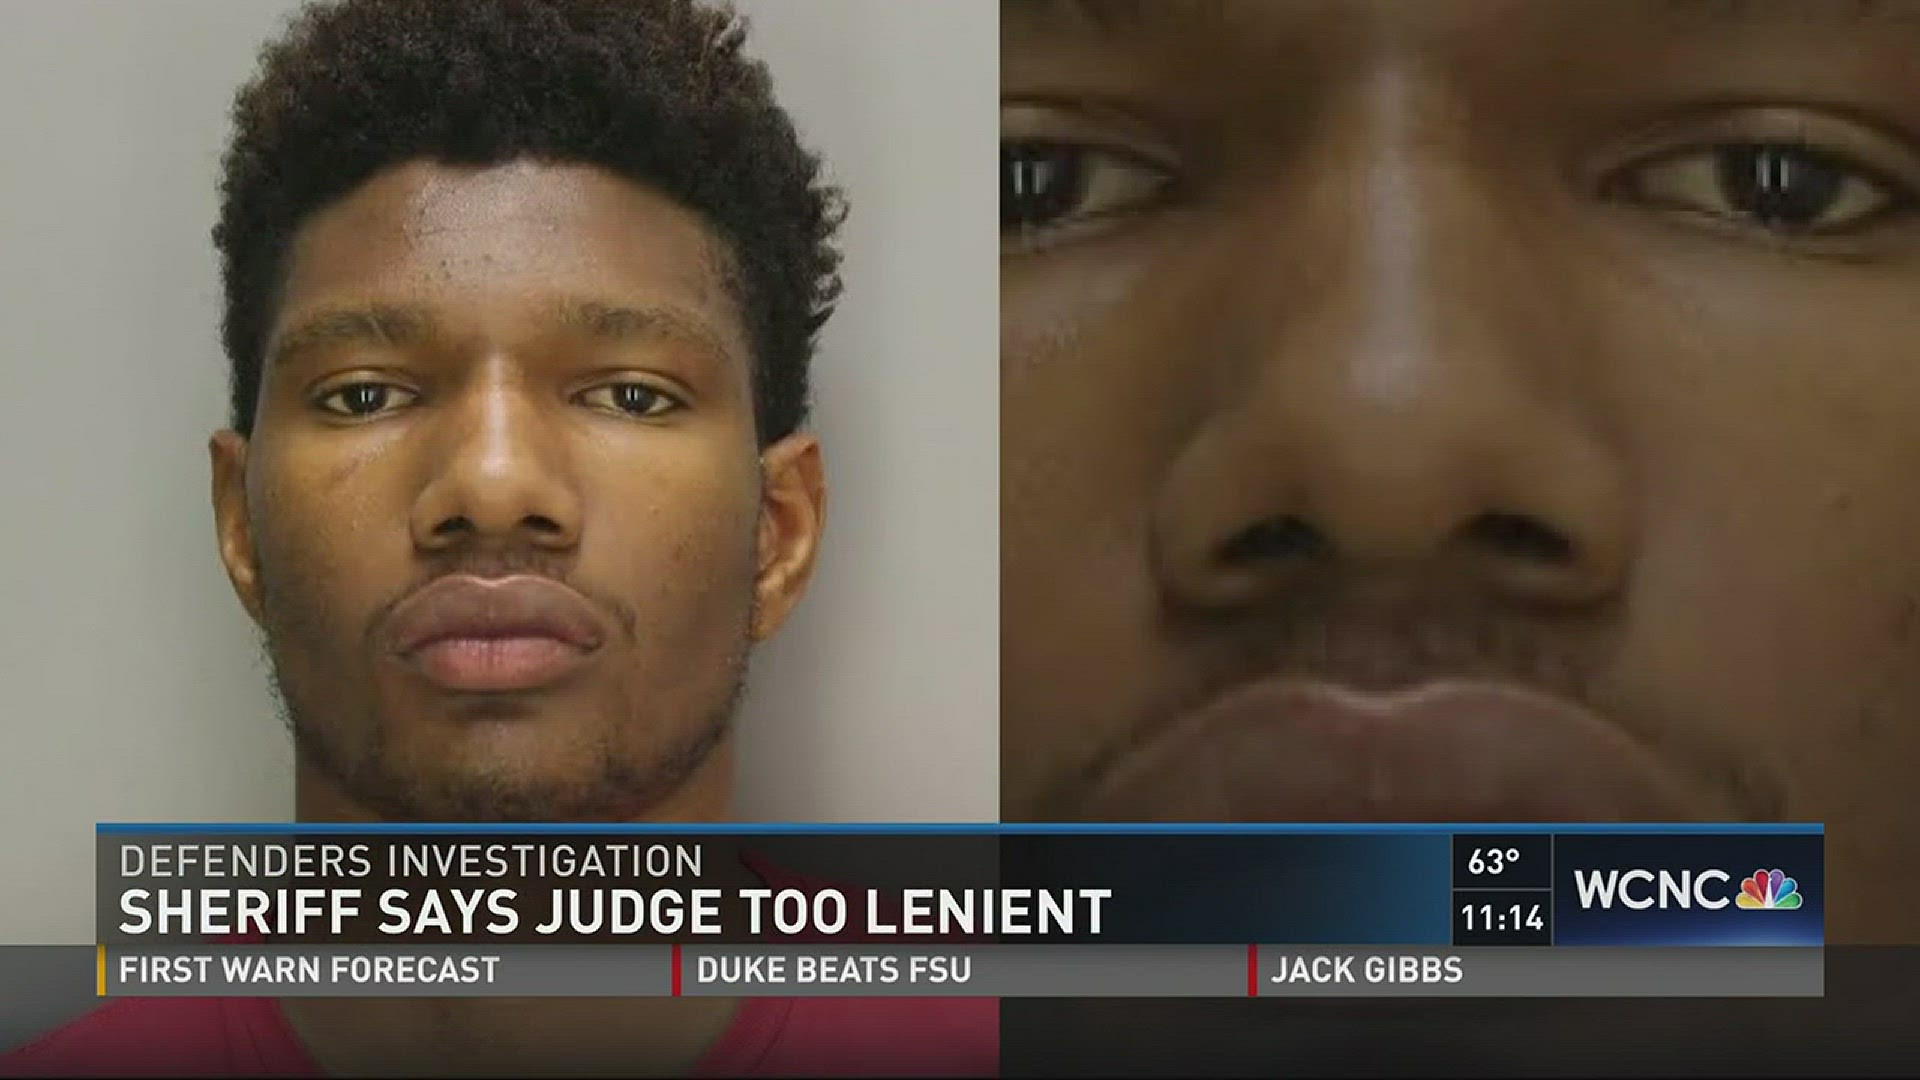 A Sheriff in our area is calling out a judge he says is too lenient on sentencing.